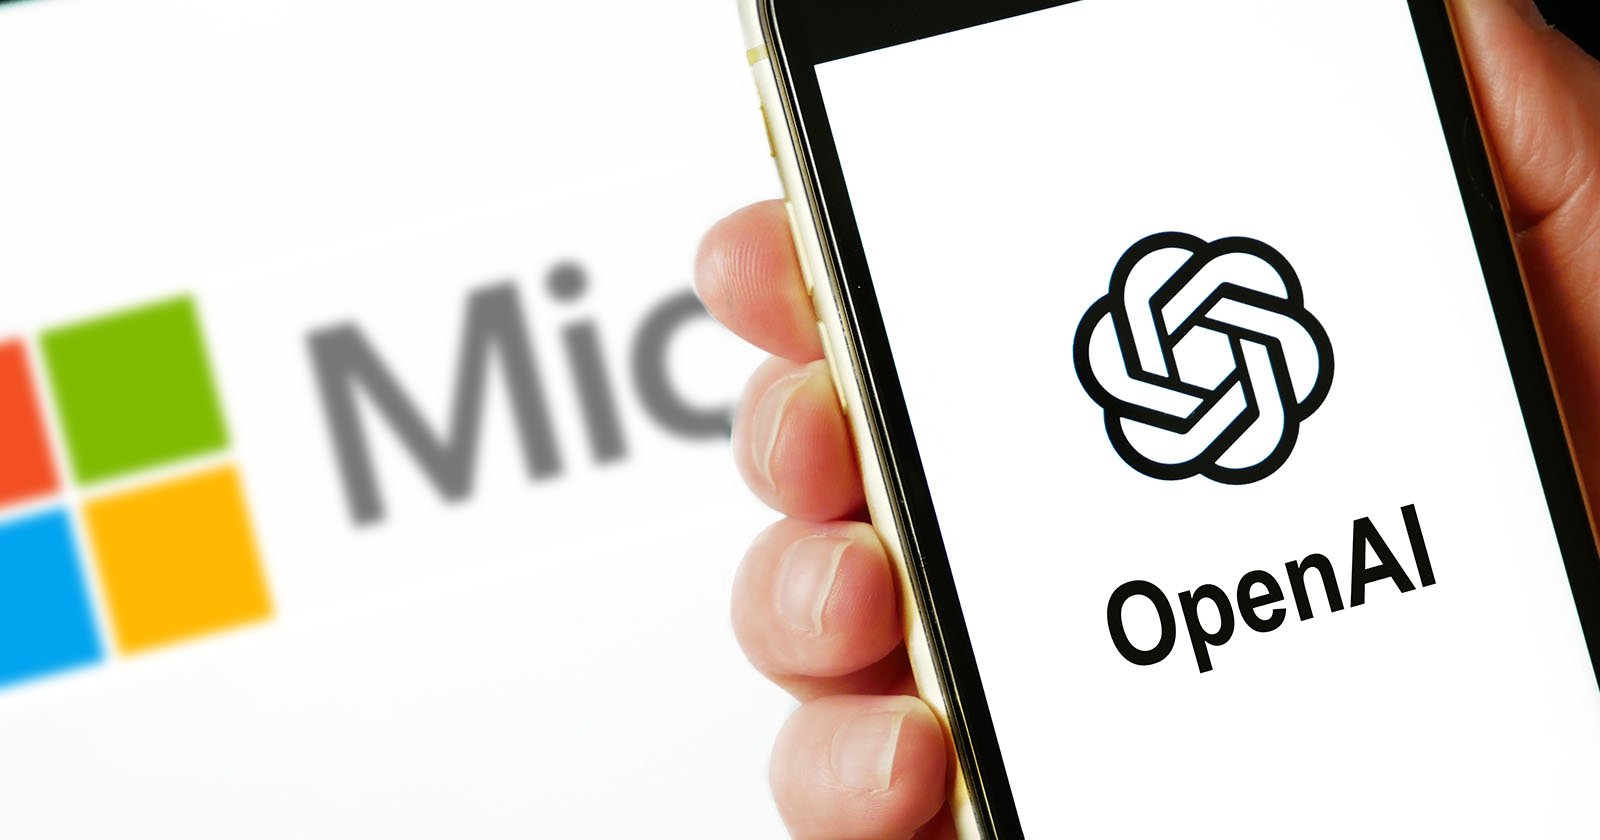 A person holds a smartphone displaying the openai logo, with a blurred microsoft logo visible in the background on another device.